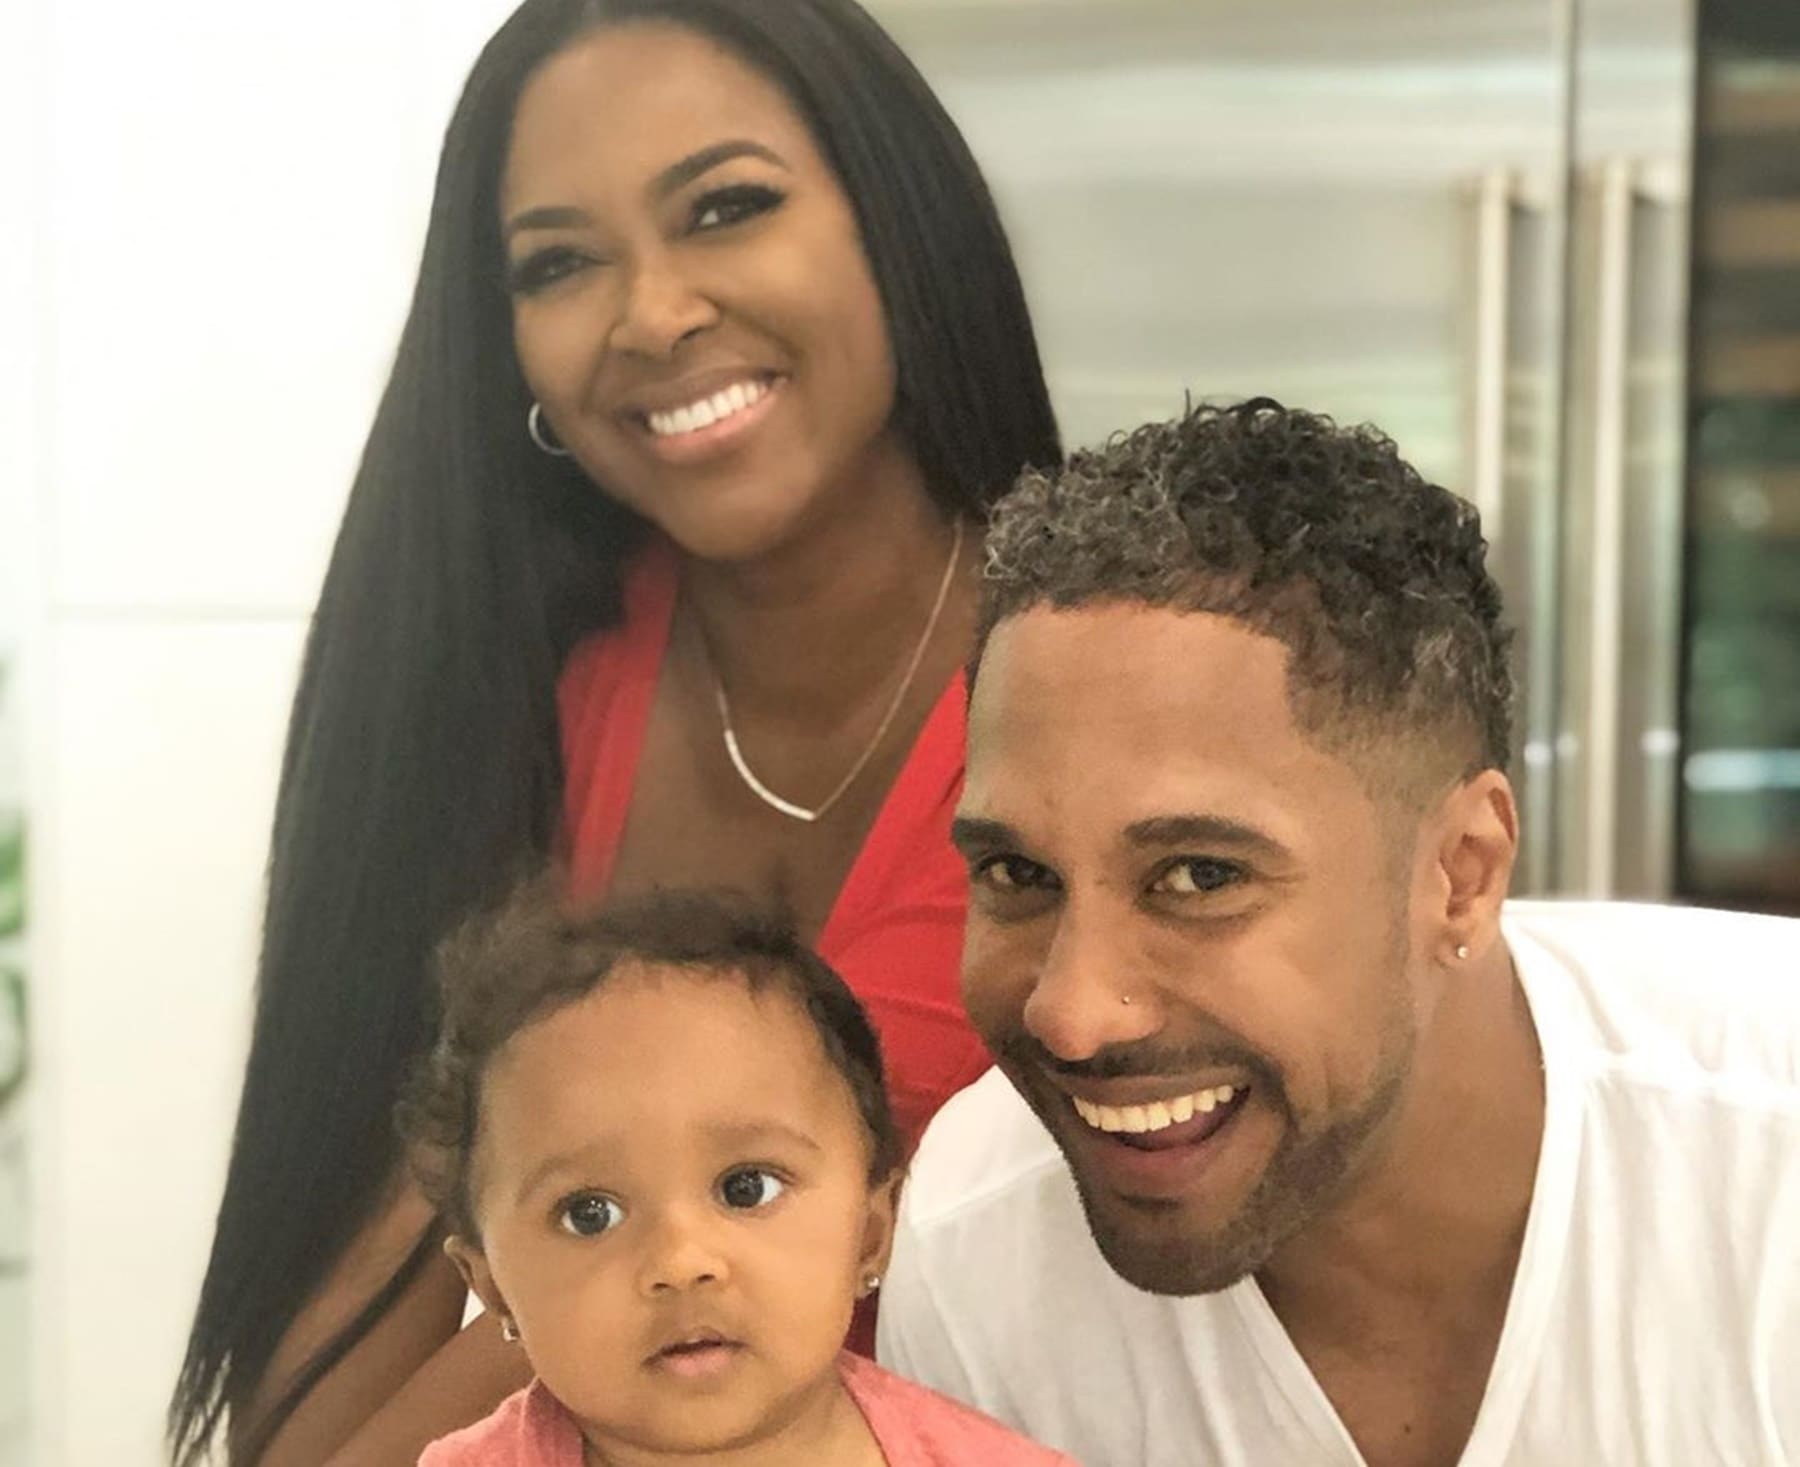 Fearless Brooklyn Daly Has Kenya Moore's Fans In Awe - See The Latest Video Featuring The Miracle Baby